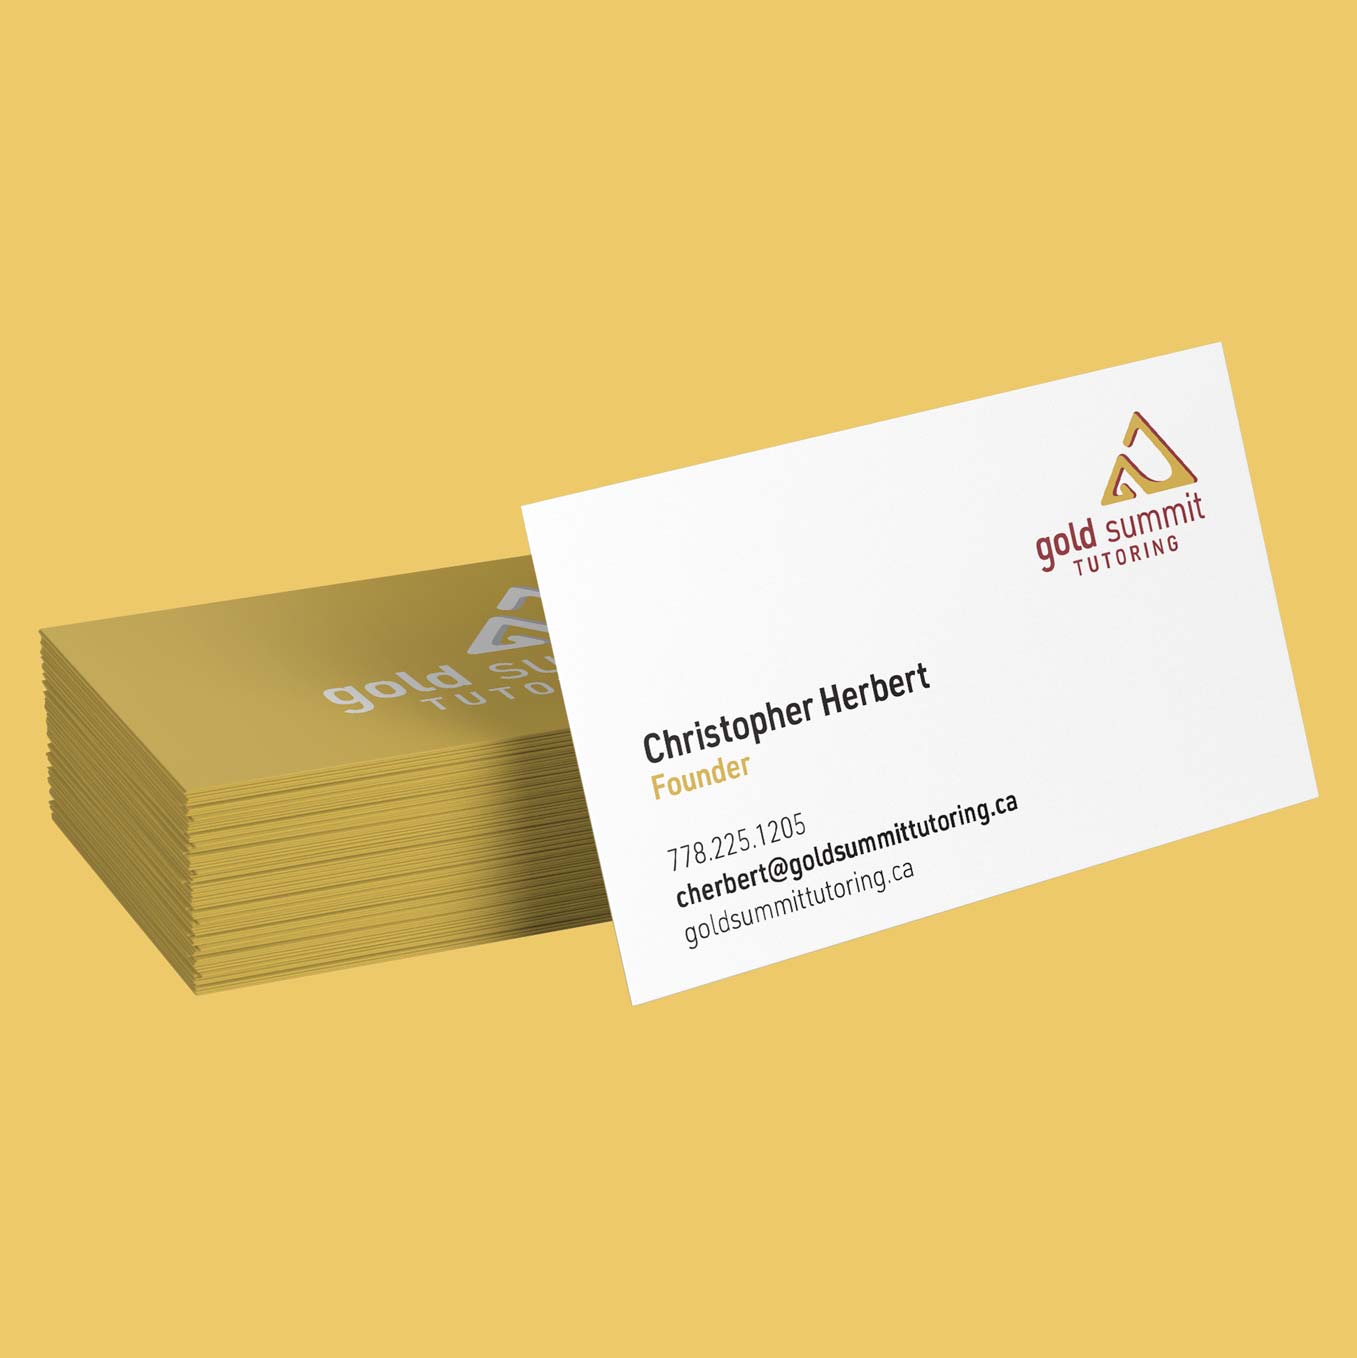 business card design for Gold summit tutoring by Alina Demidova